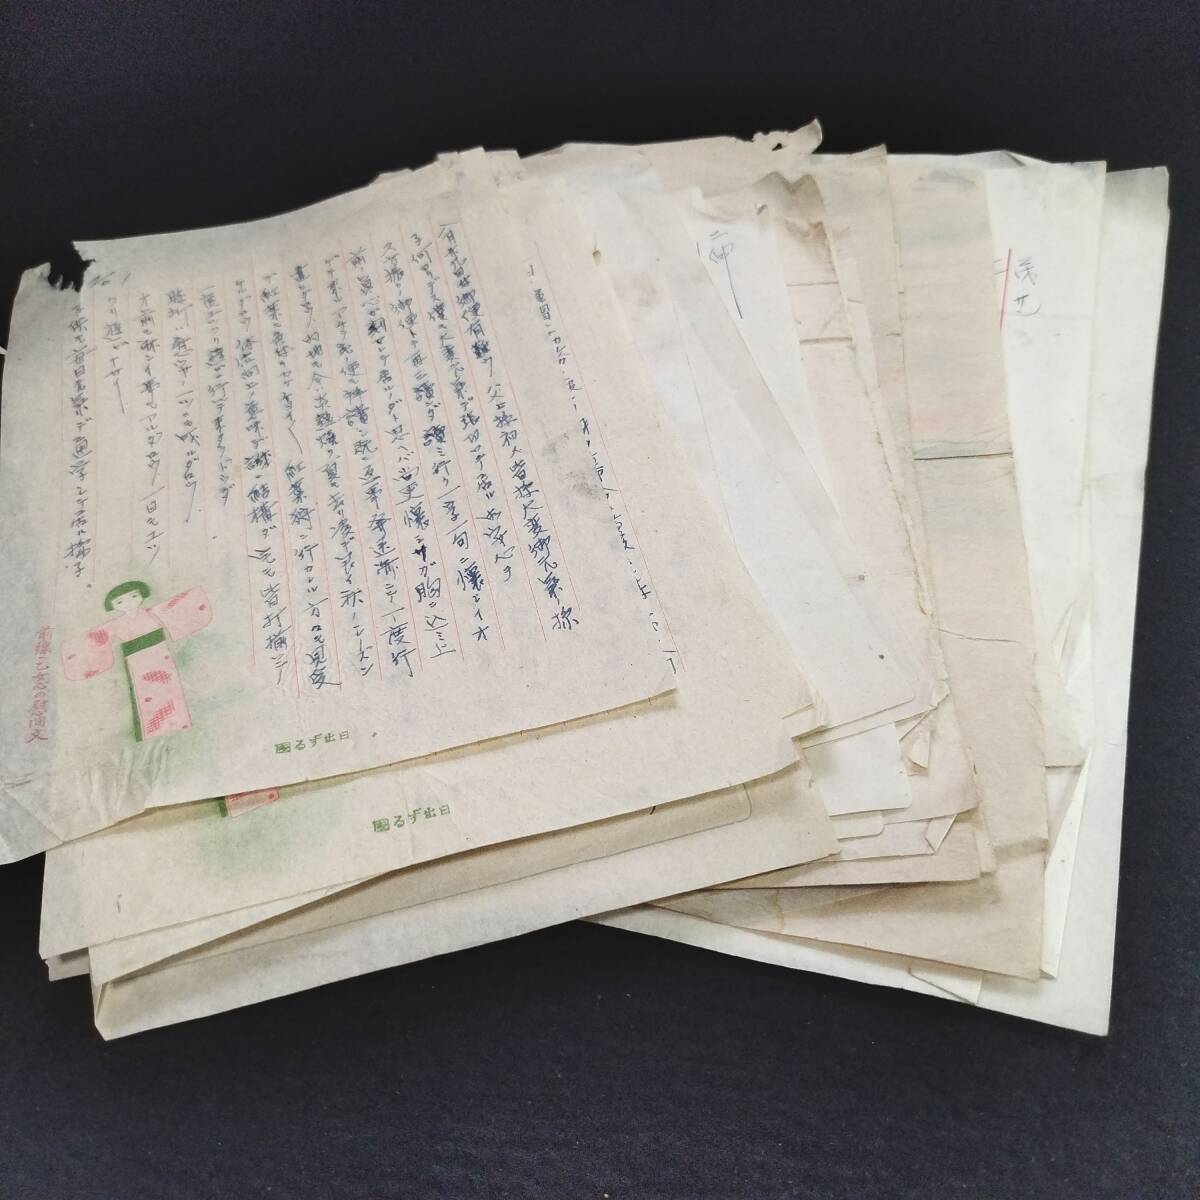 R66 full . main . China Okinawa [ army . mail postcard 74 point another letter etc. together ] entire document war war middle army . materials leaf paper autograph land army 